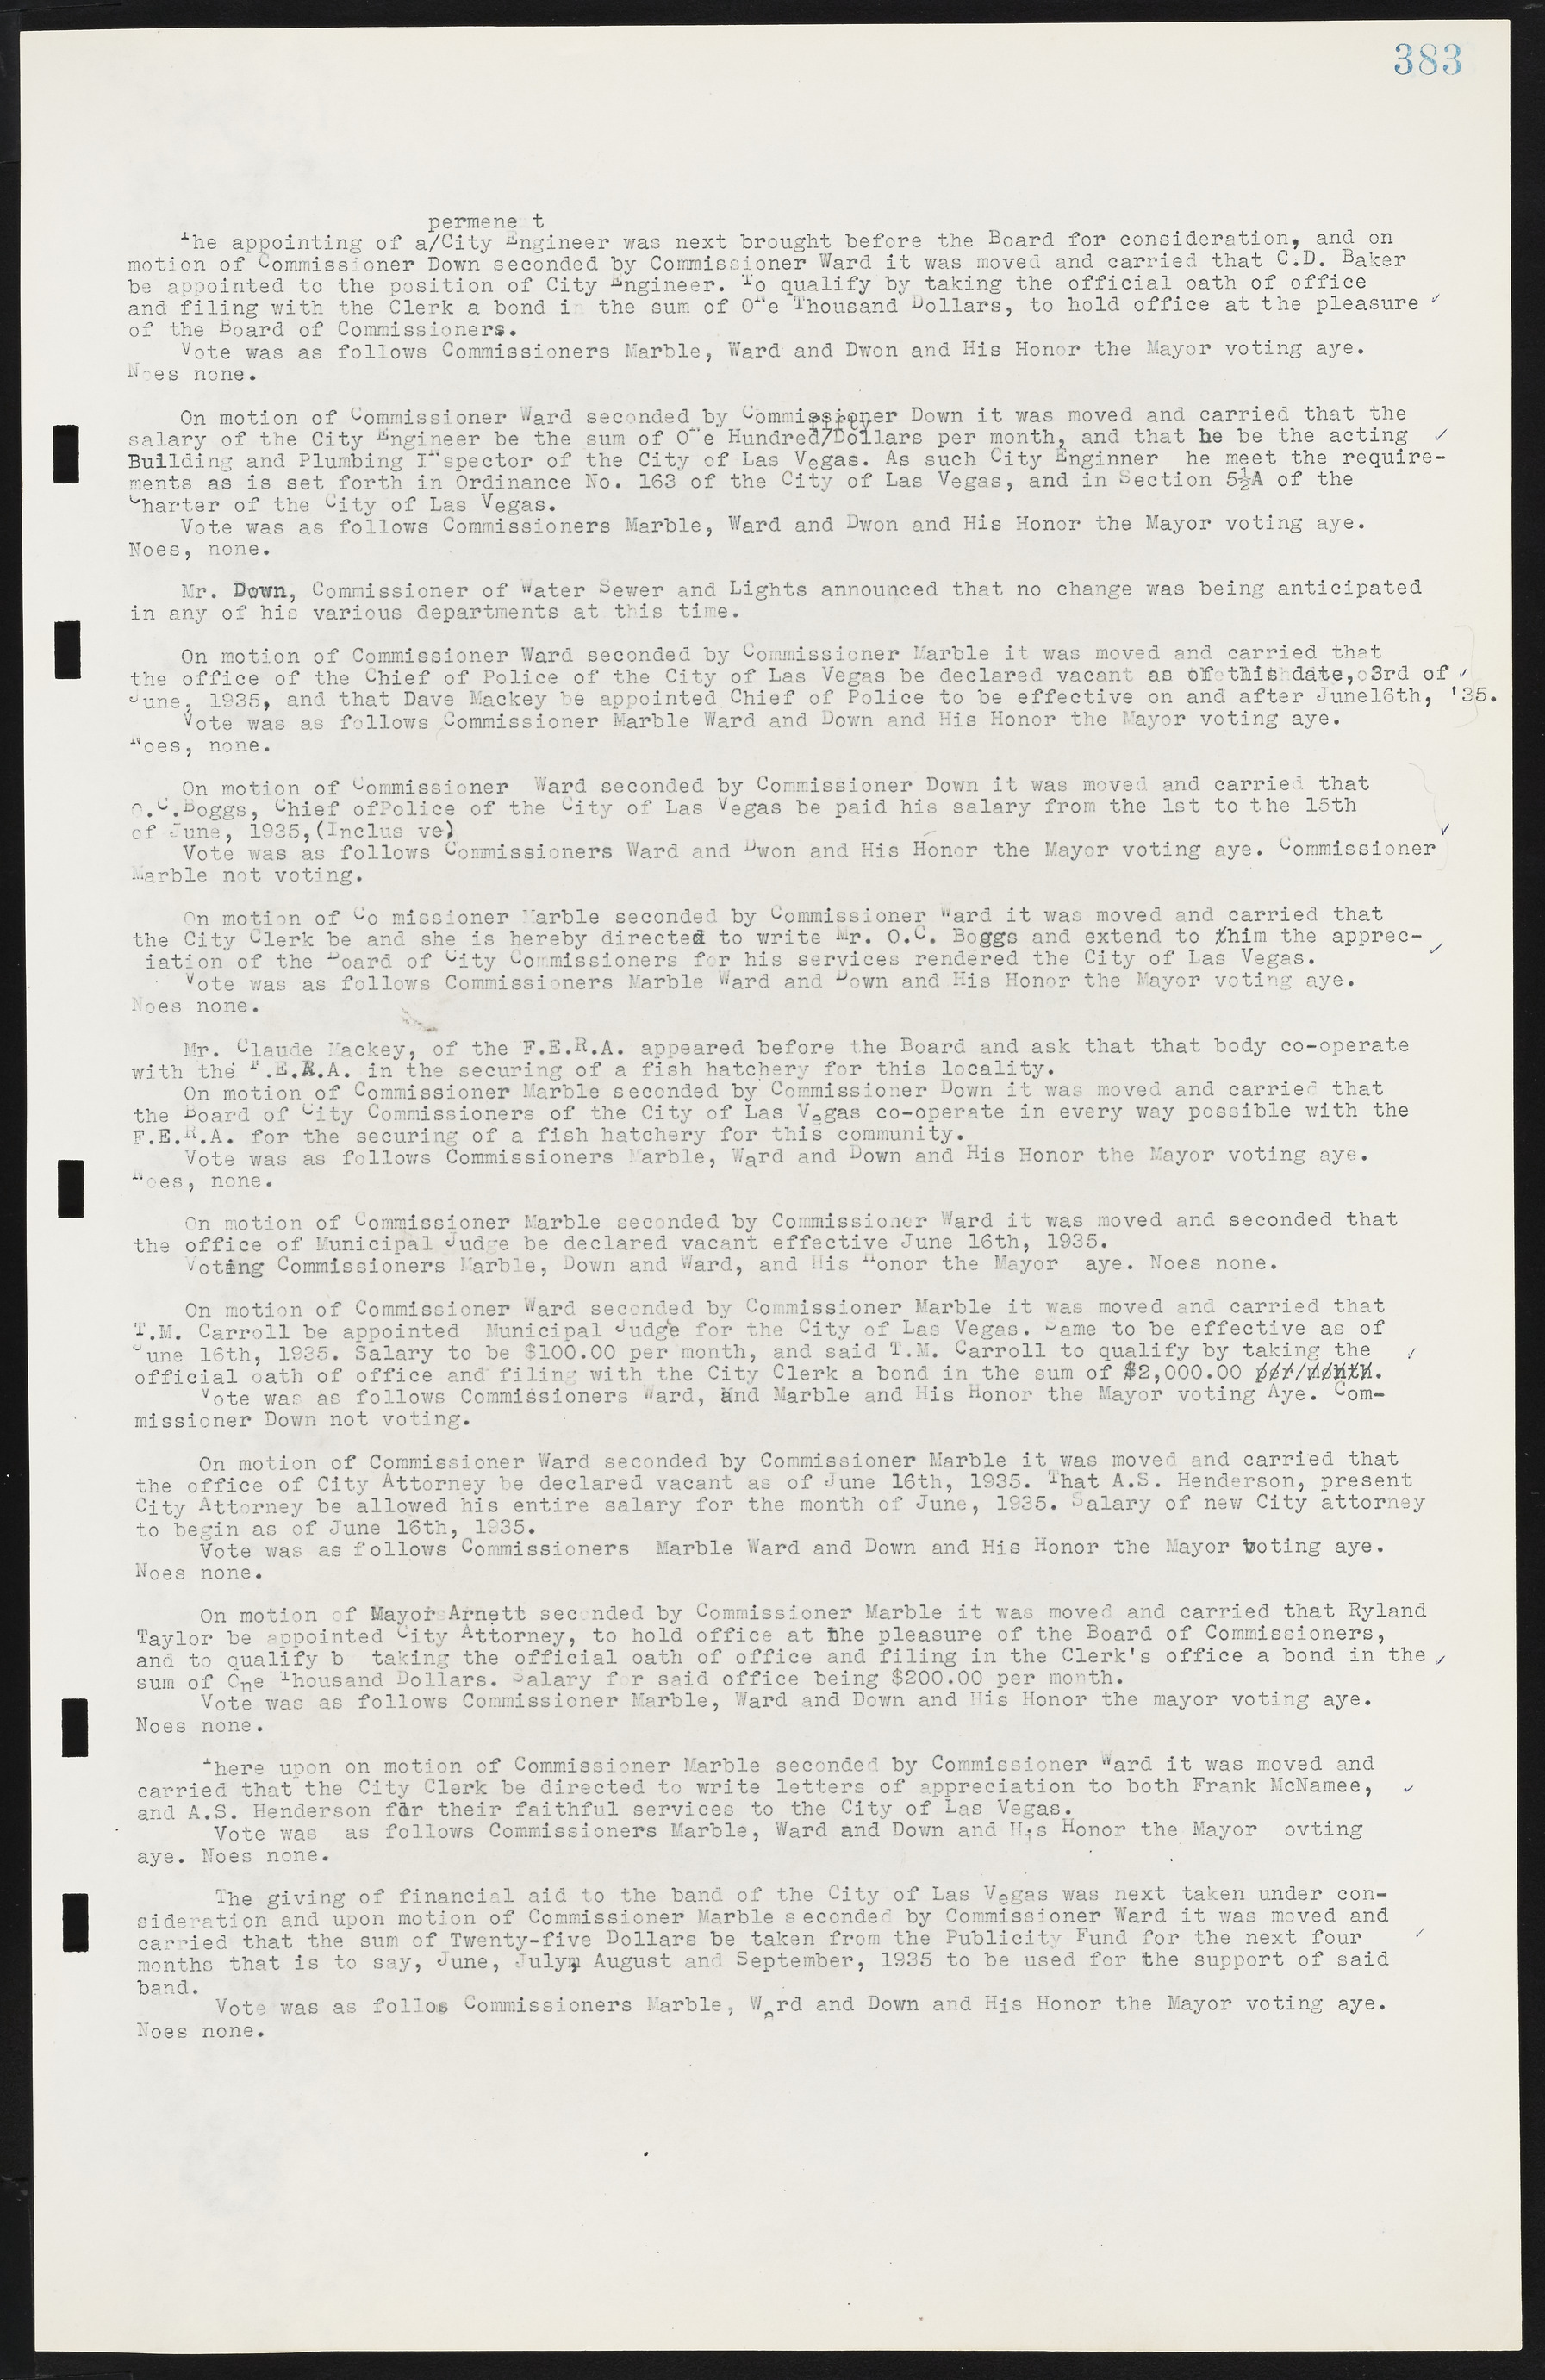 Las Vegas City Commission Minutes, May 14, 1929 to February 11, 1937, lvc000003-390